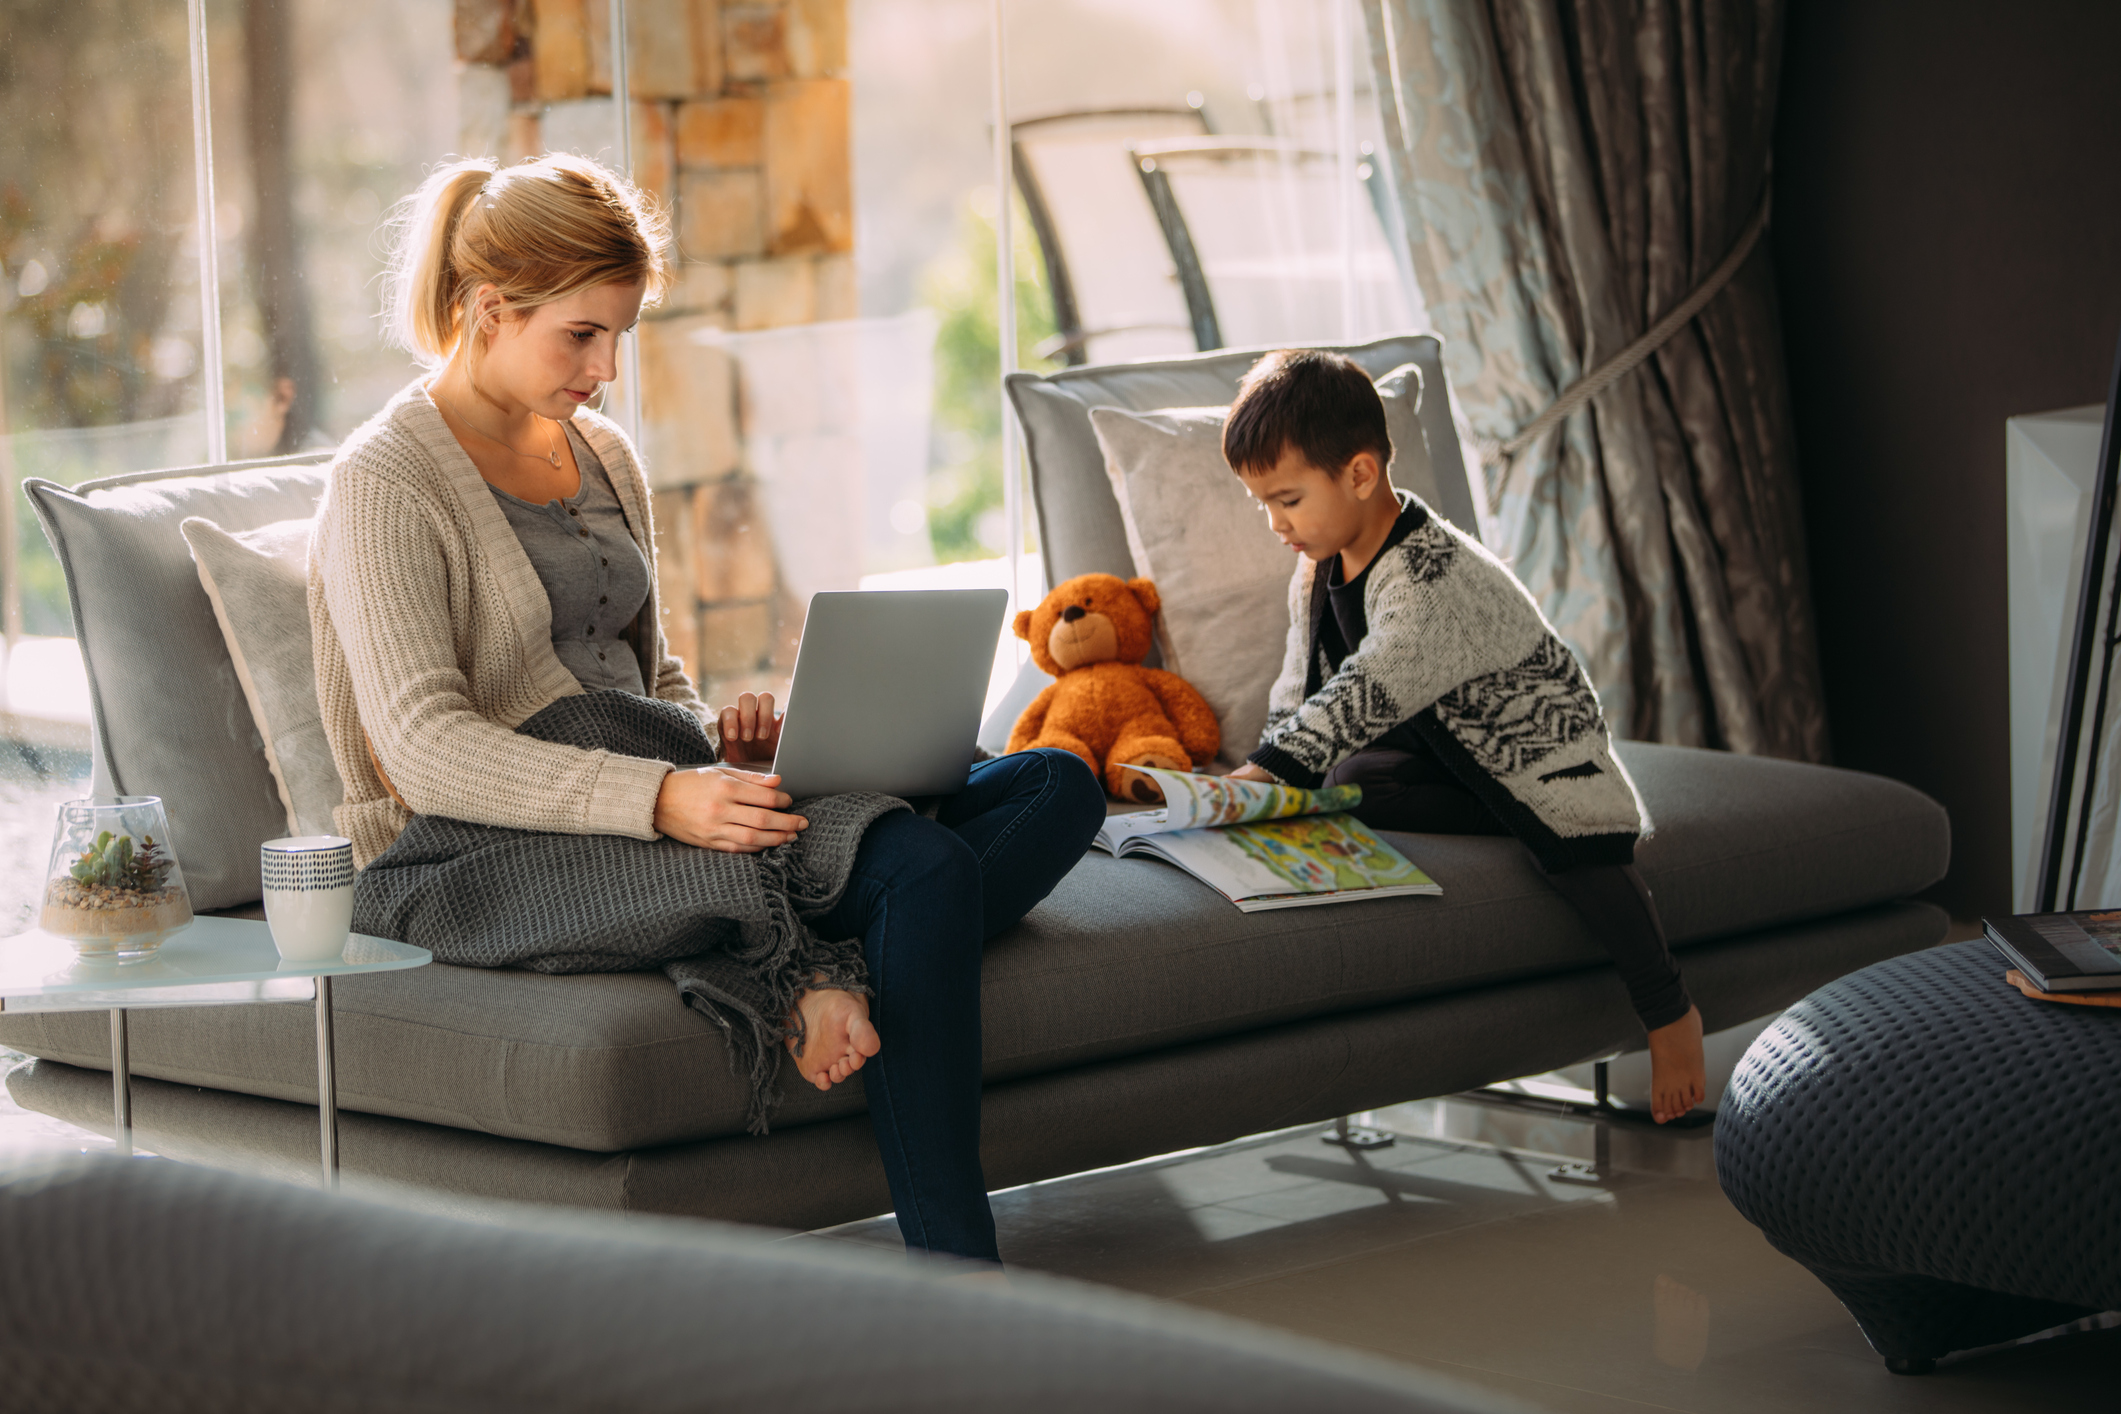 Working woman on laptop trying to make her website look more professional with her son reading a storybook. Both sitting on a grey sofa in a living room.